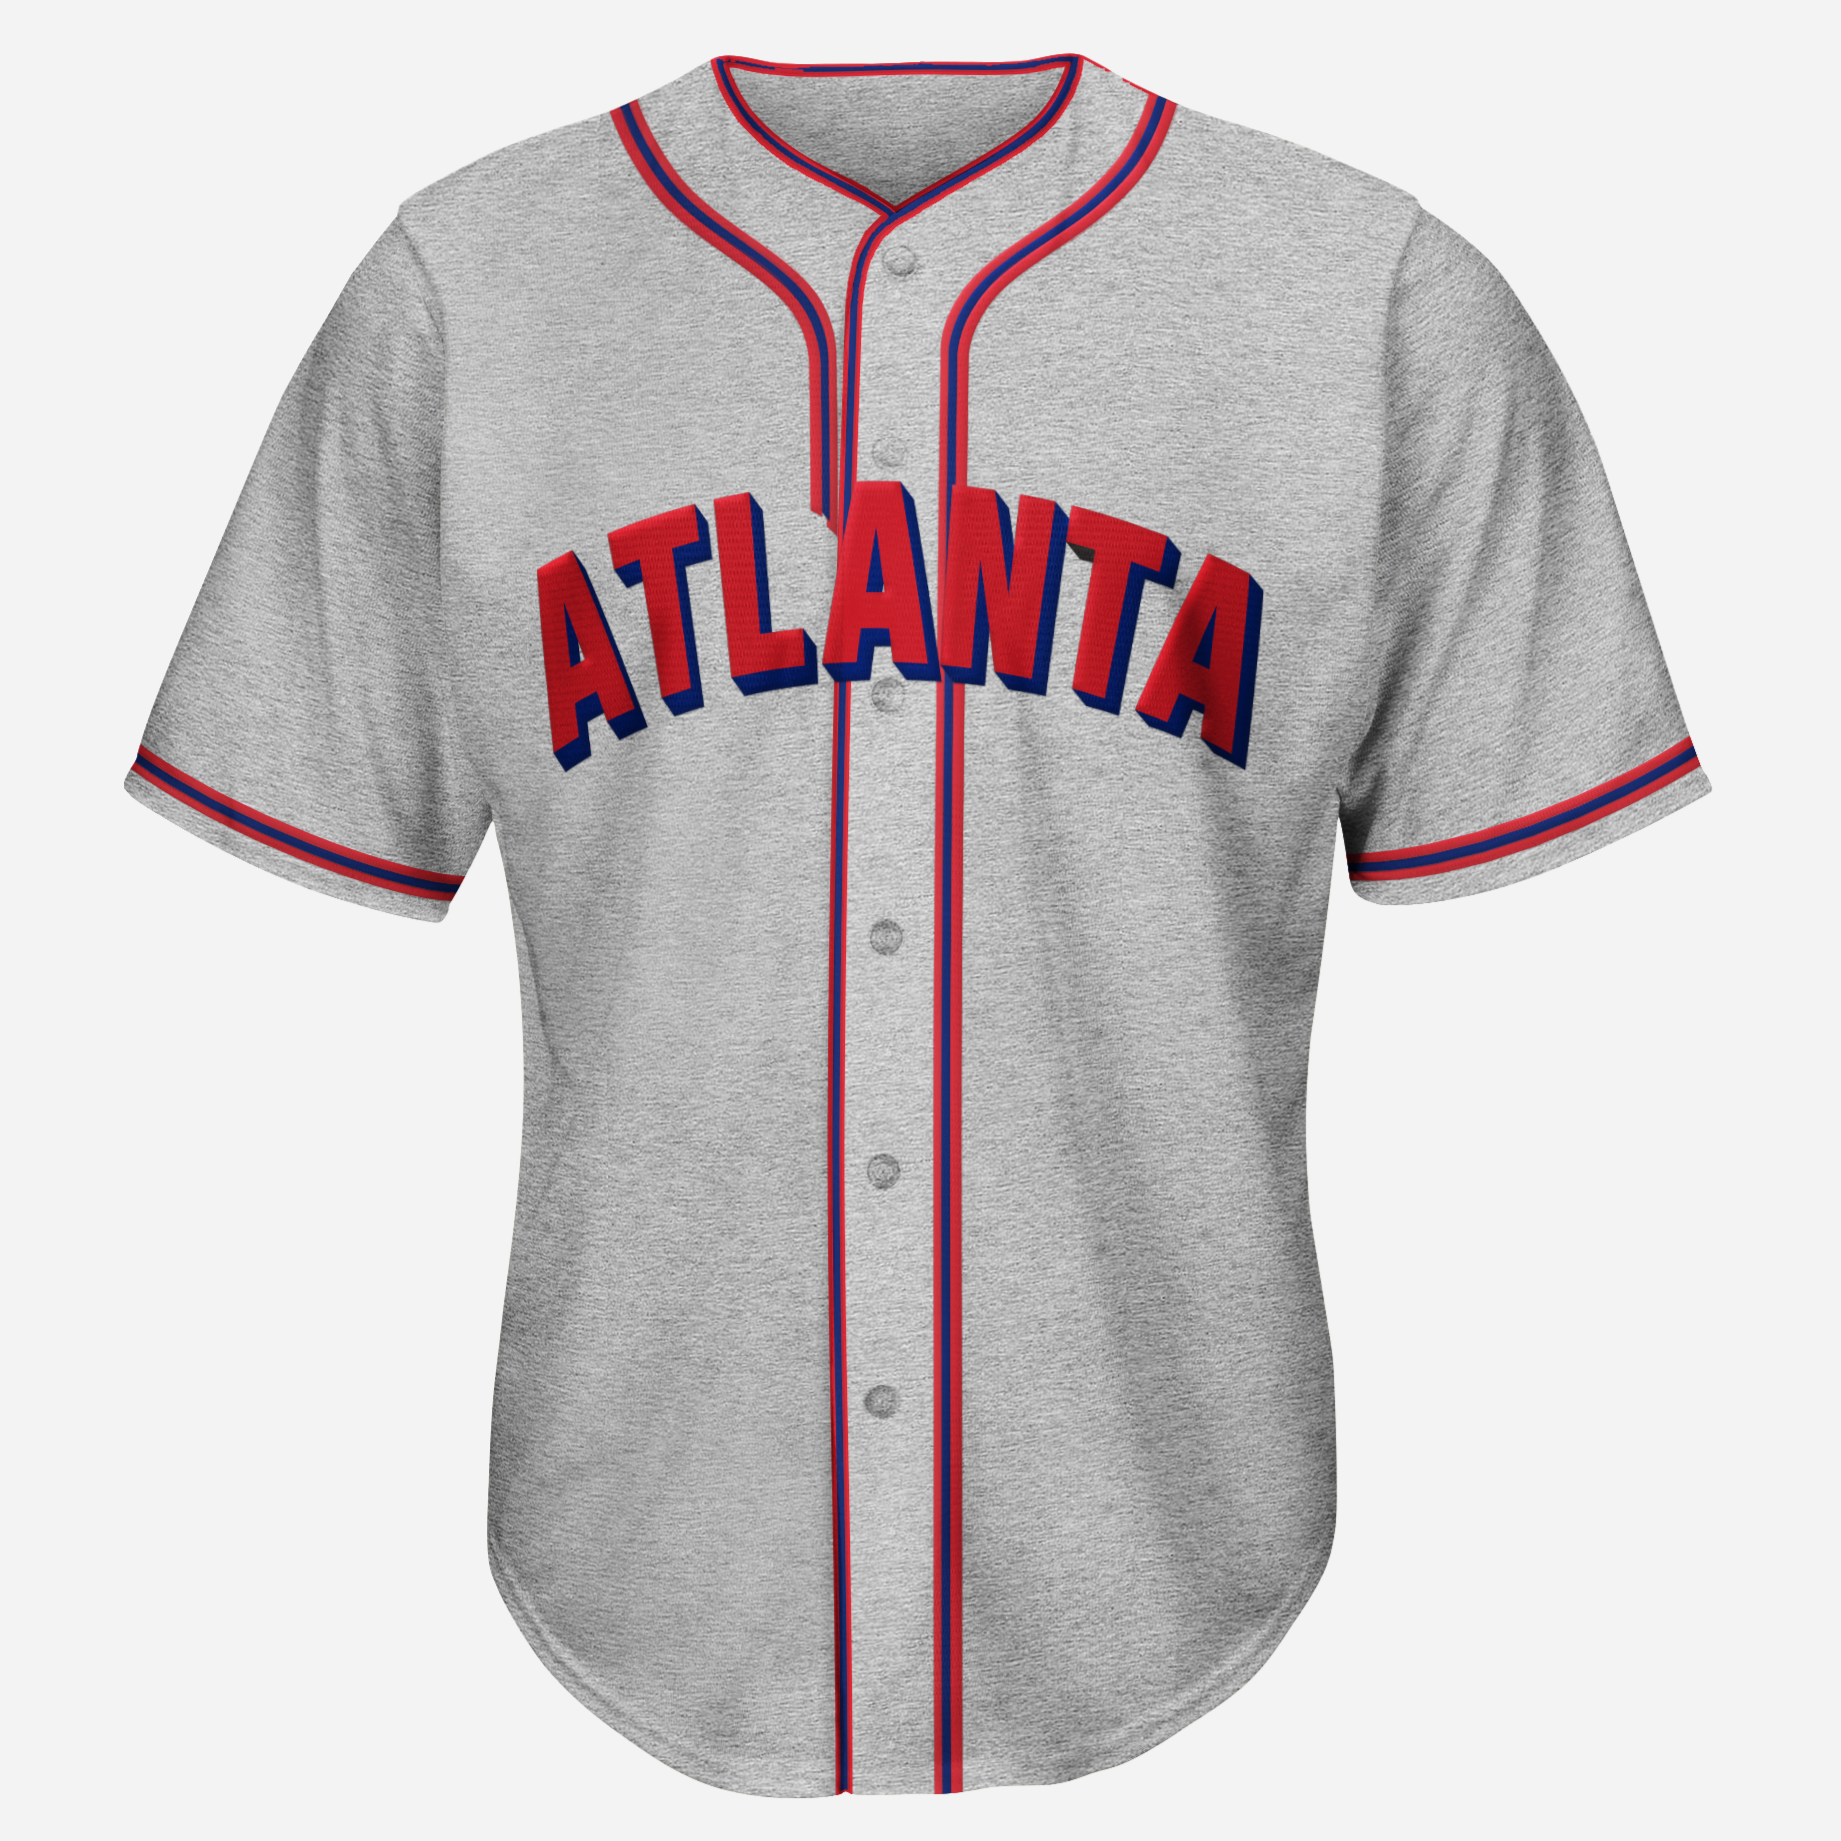 black and white braves jersey